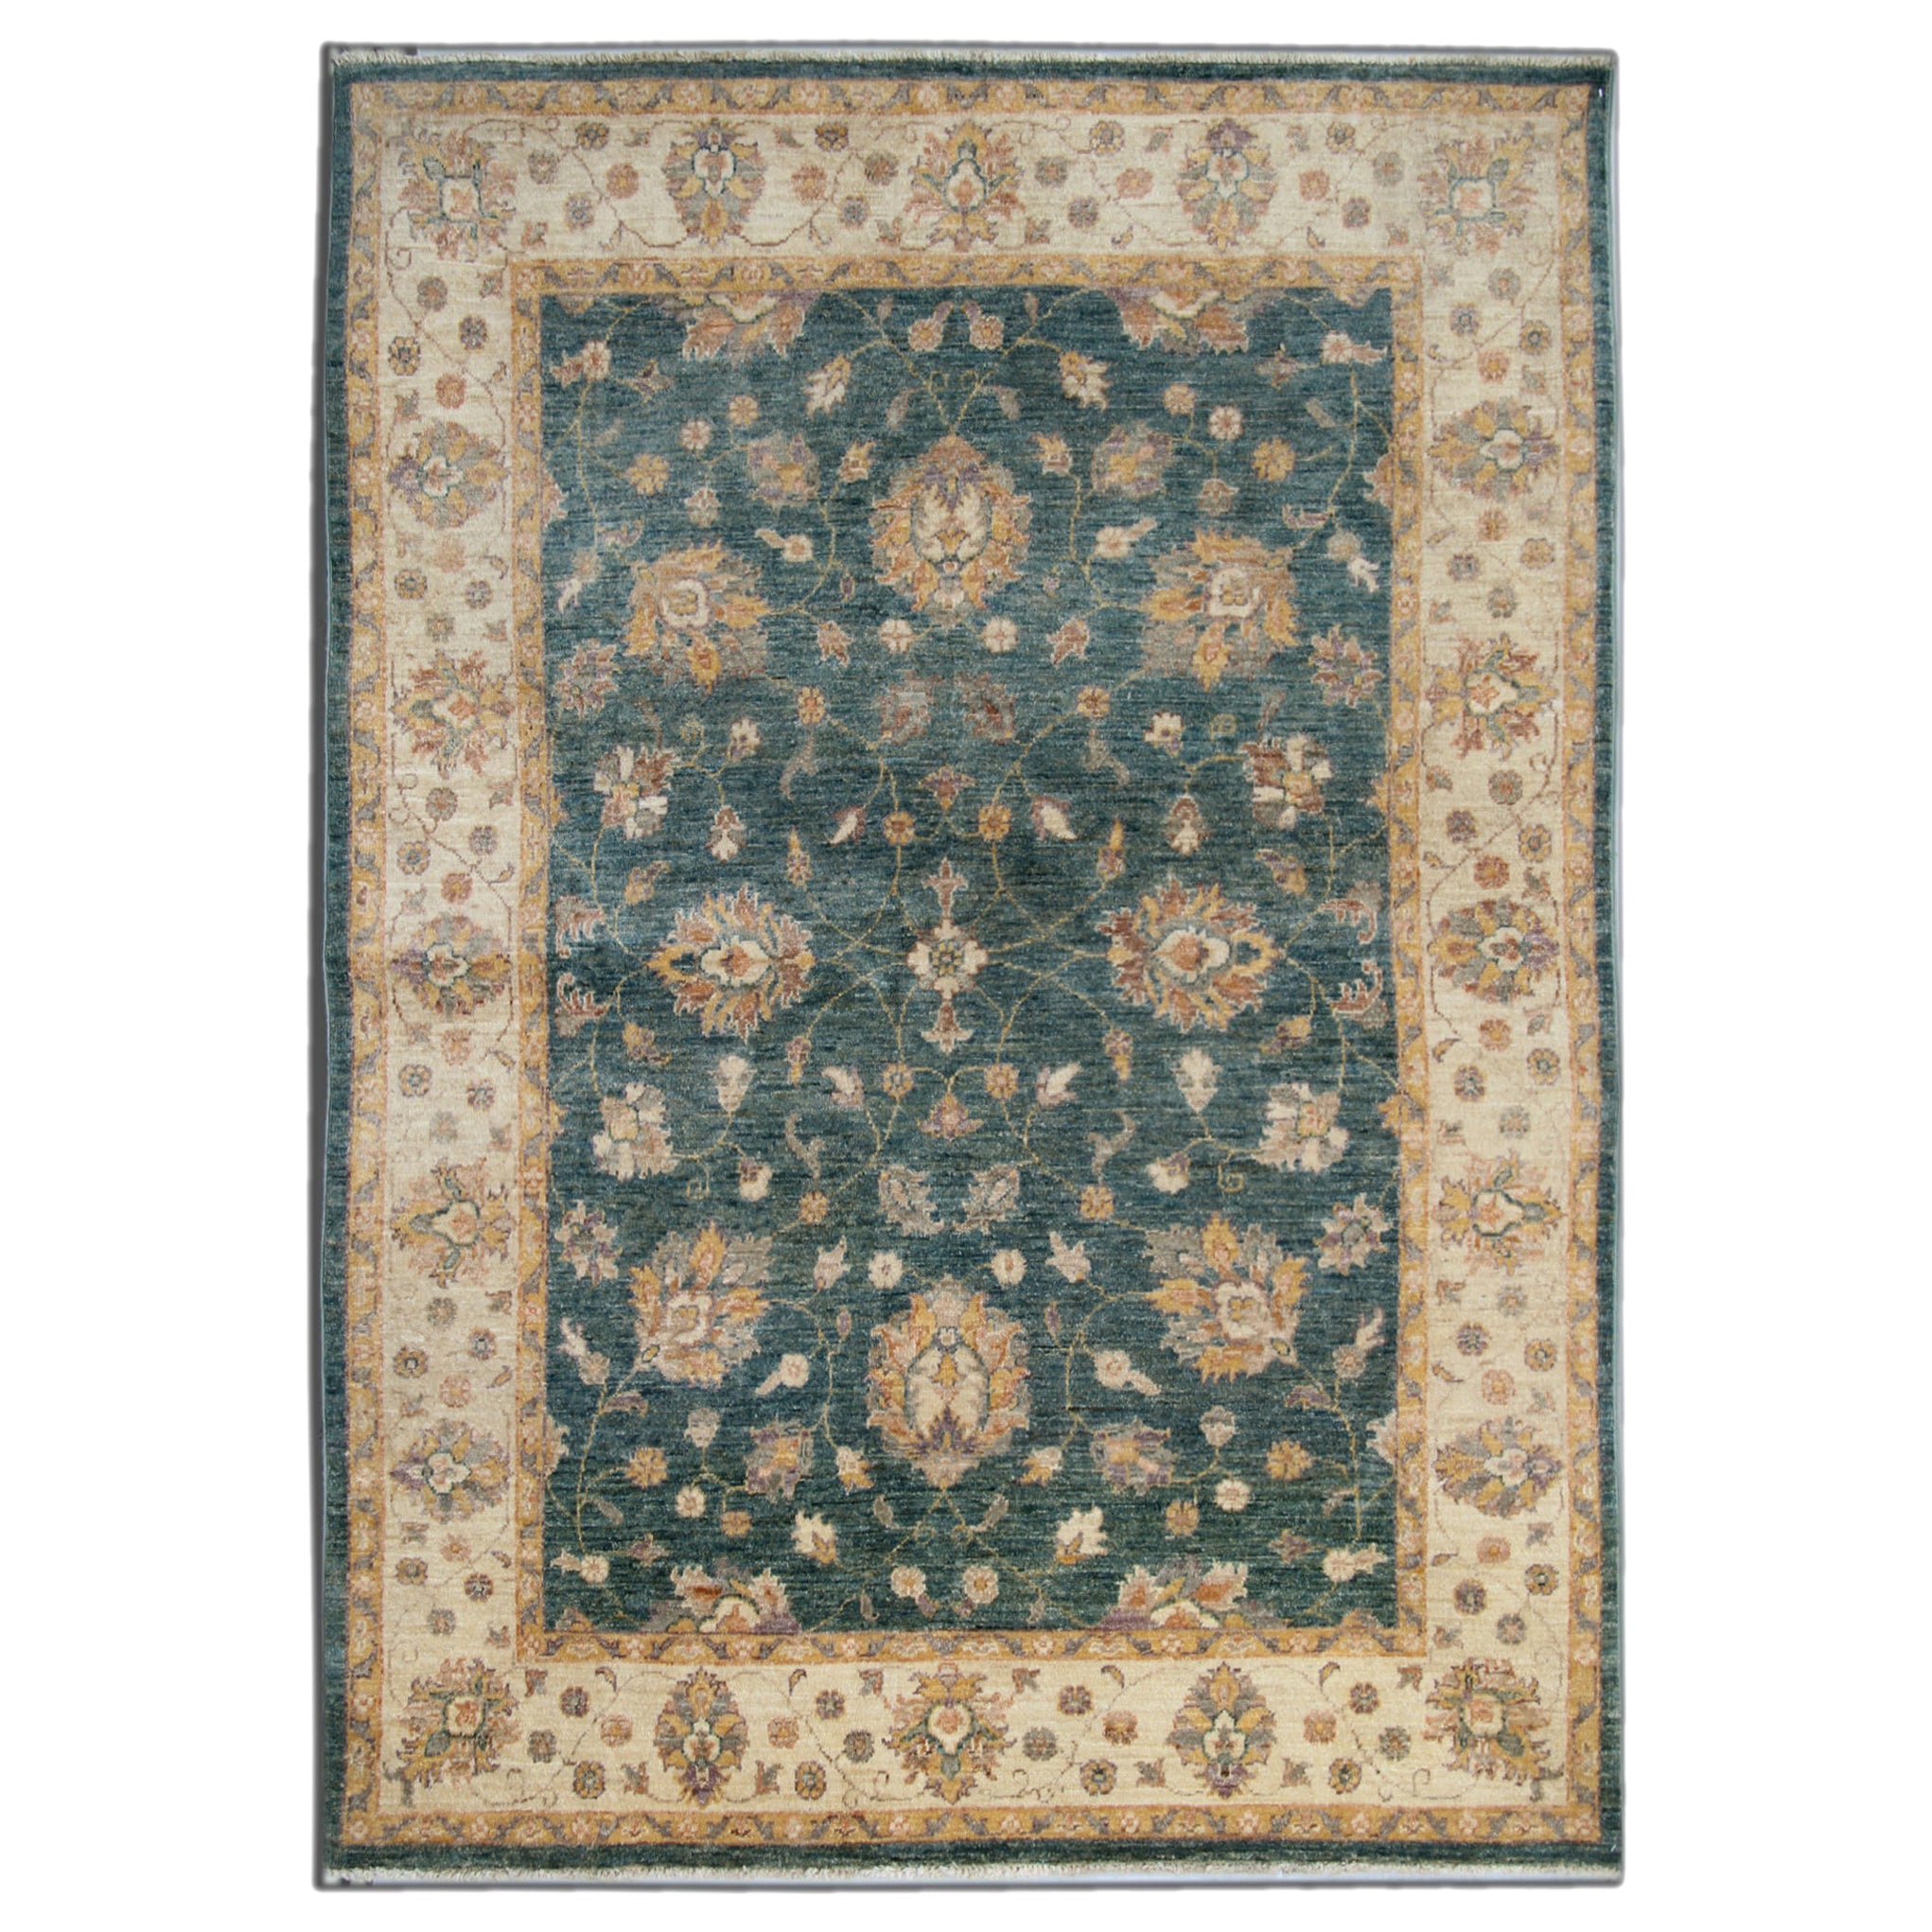 Wool Carpet Traditional Rug Floral Green Cream Wool Area Rug All Over For Sale